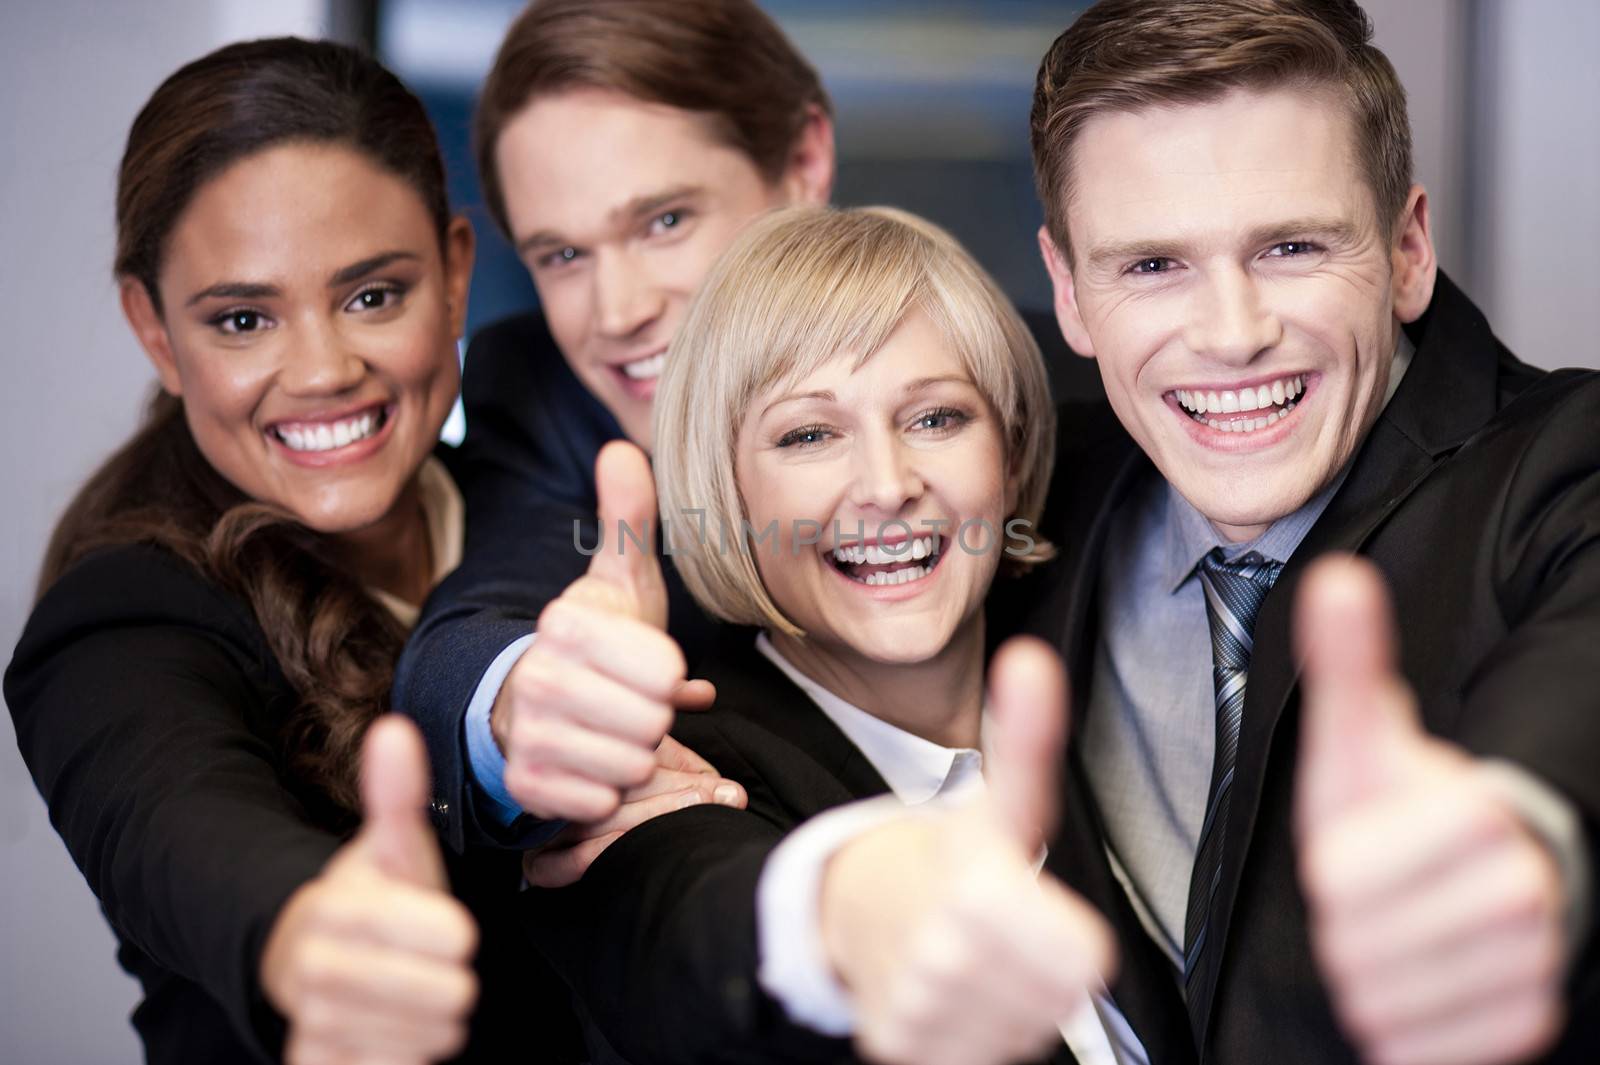 Corporate team gesturing thumbs up by stockyimages